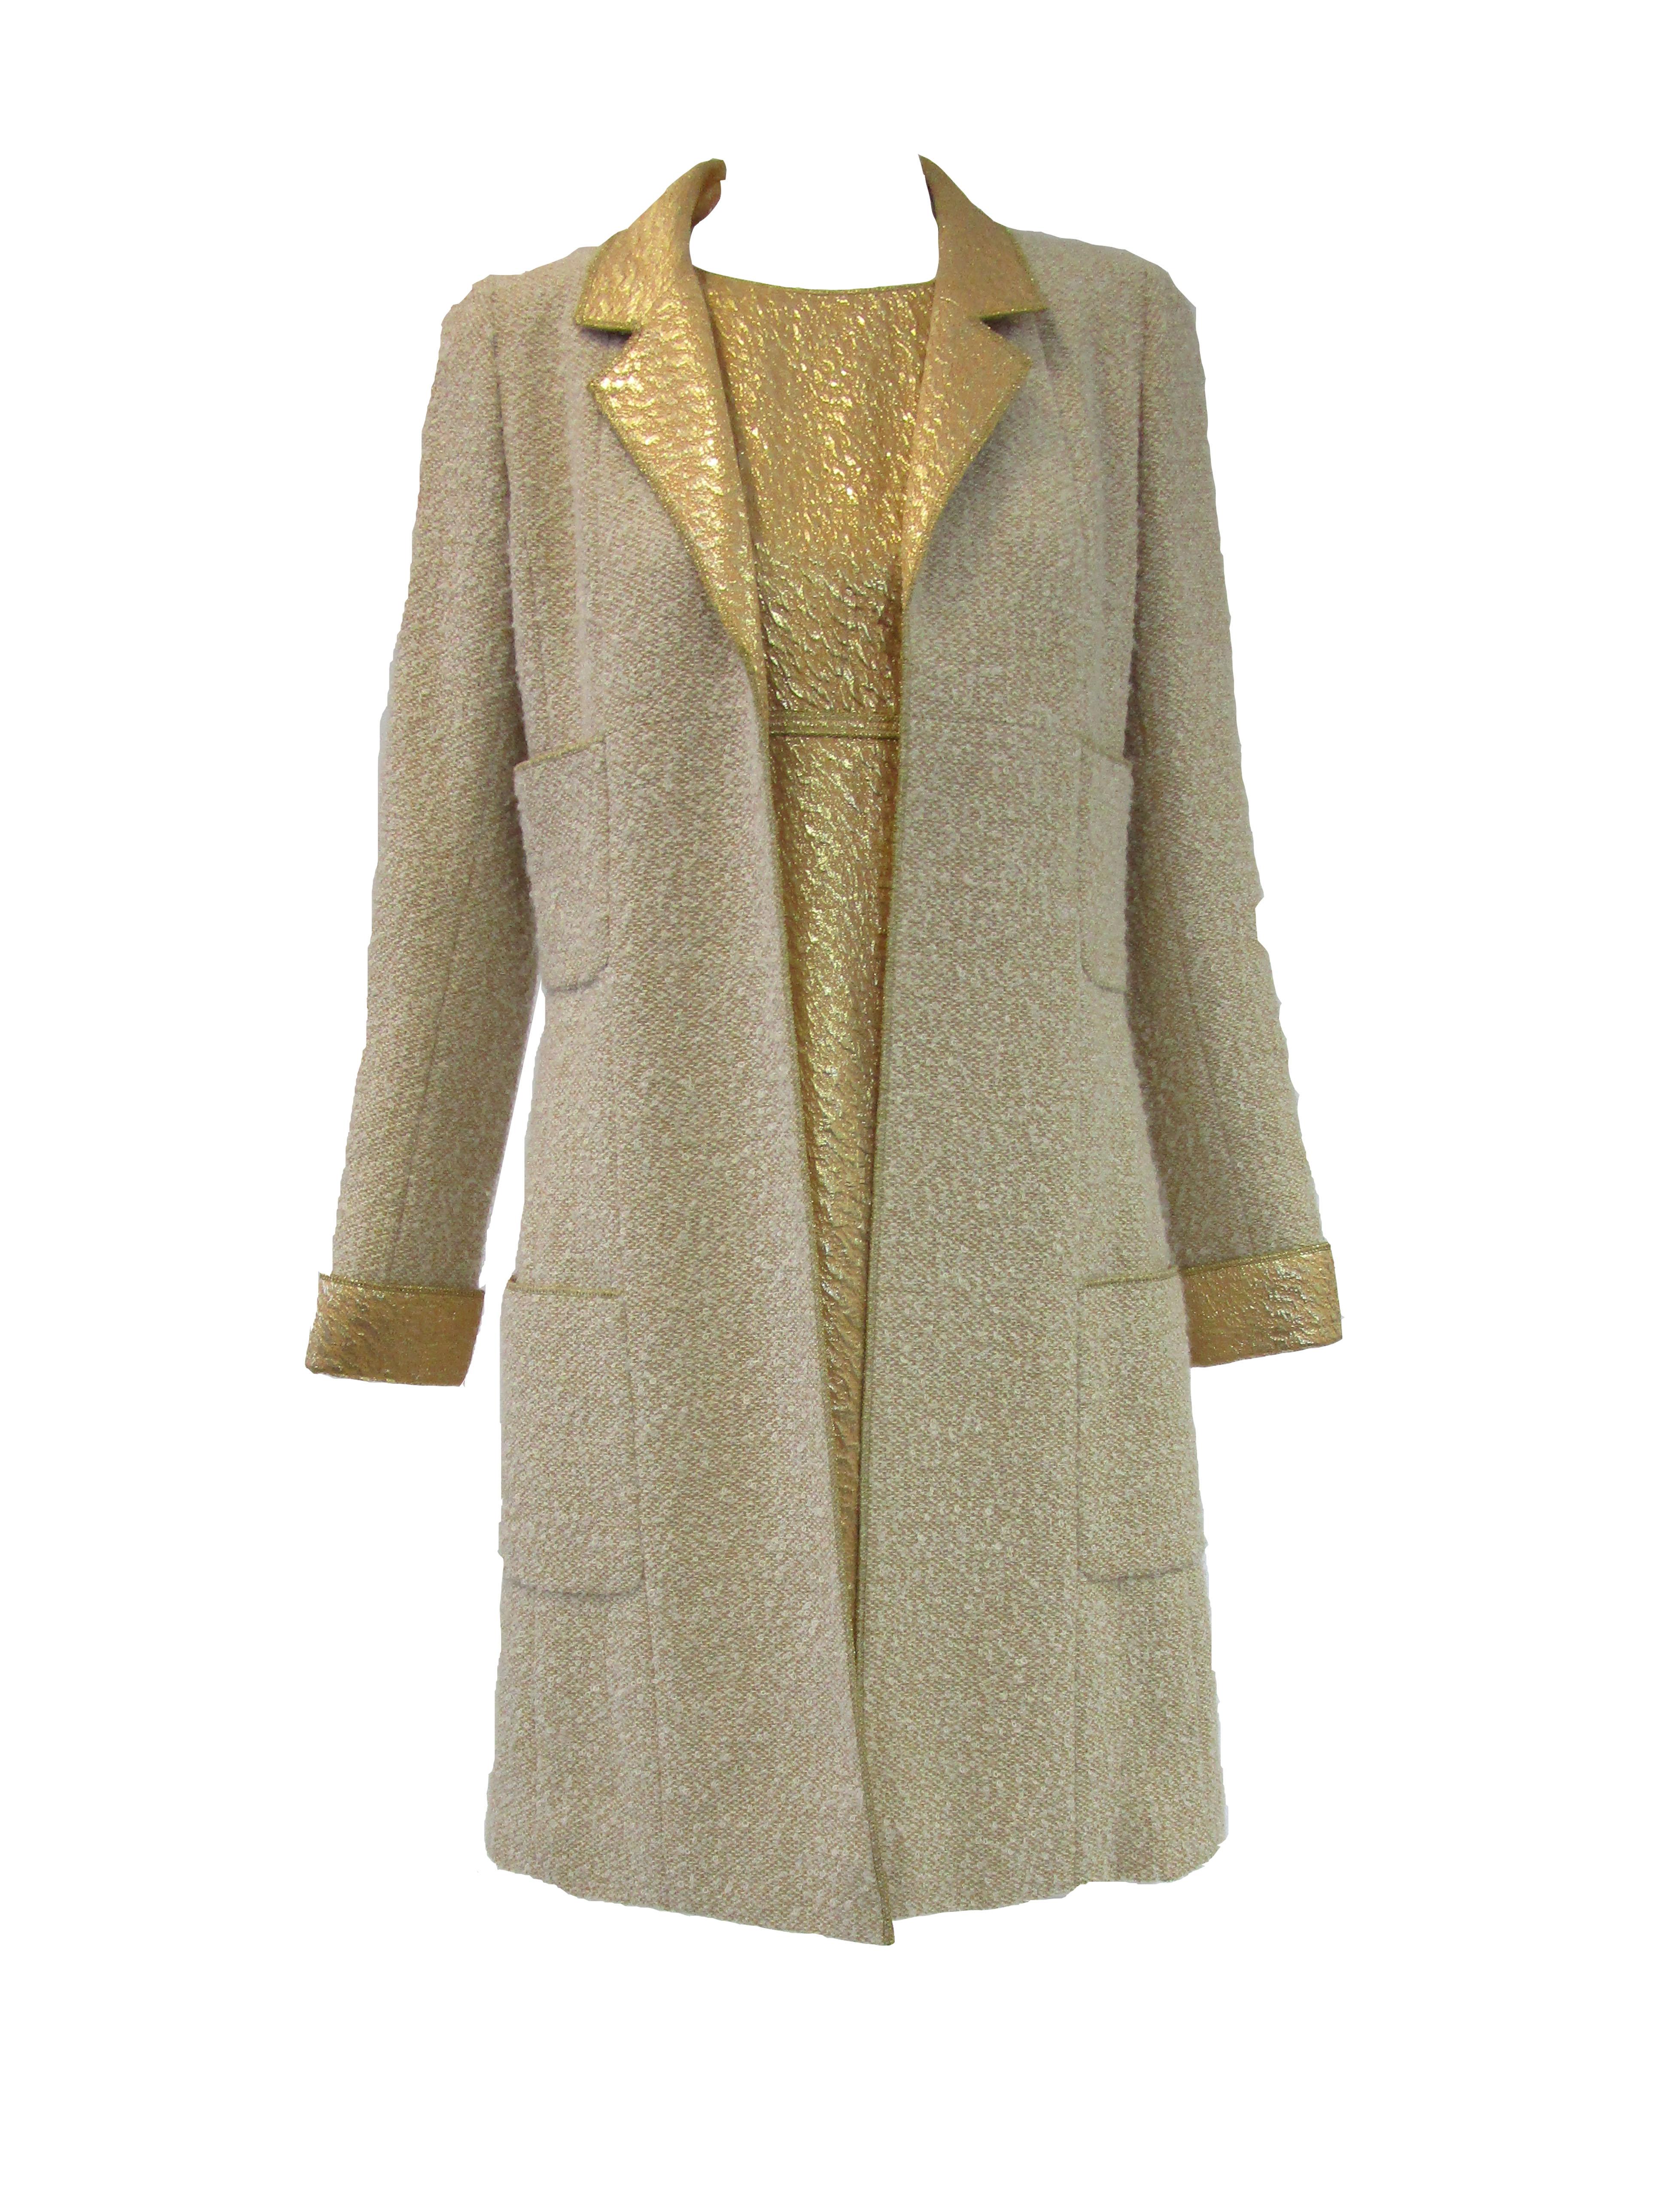 1996 Chanel by Lagerfeld Golden Boucle and Lame Shift Dress and Coat For Sale 3